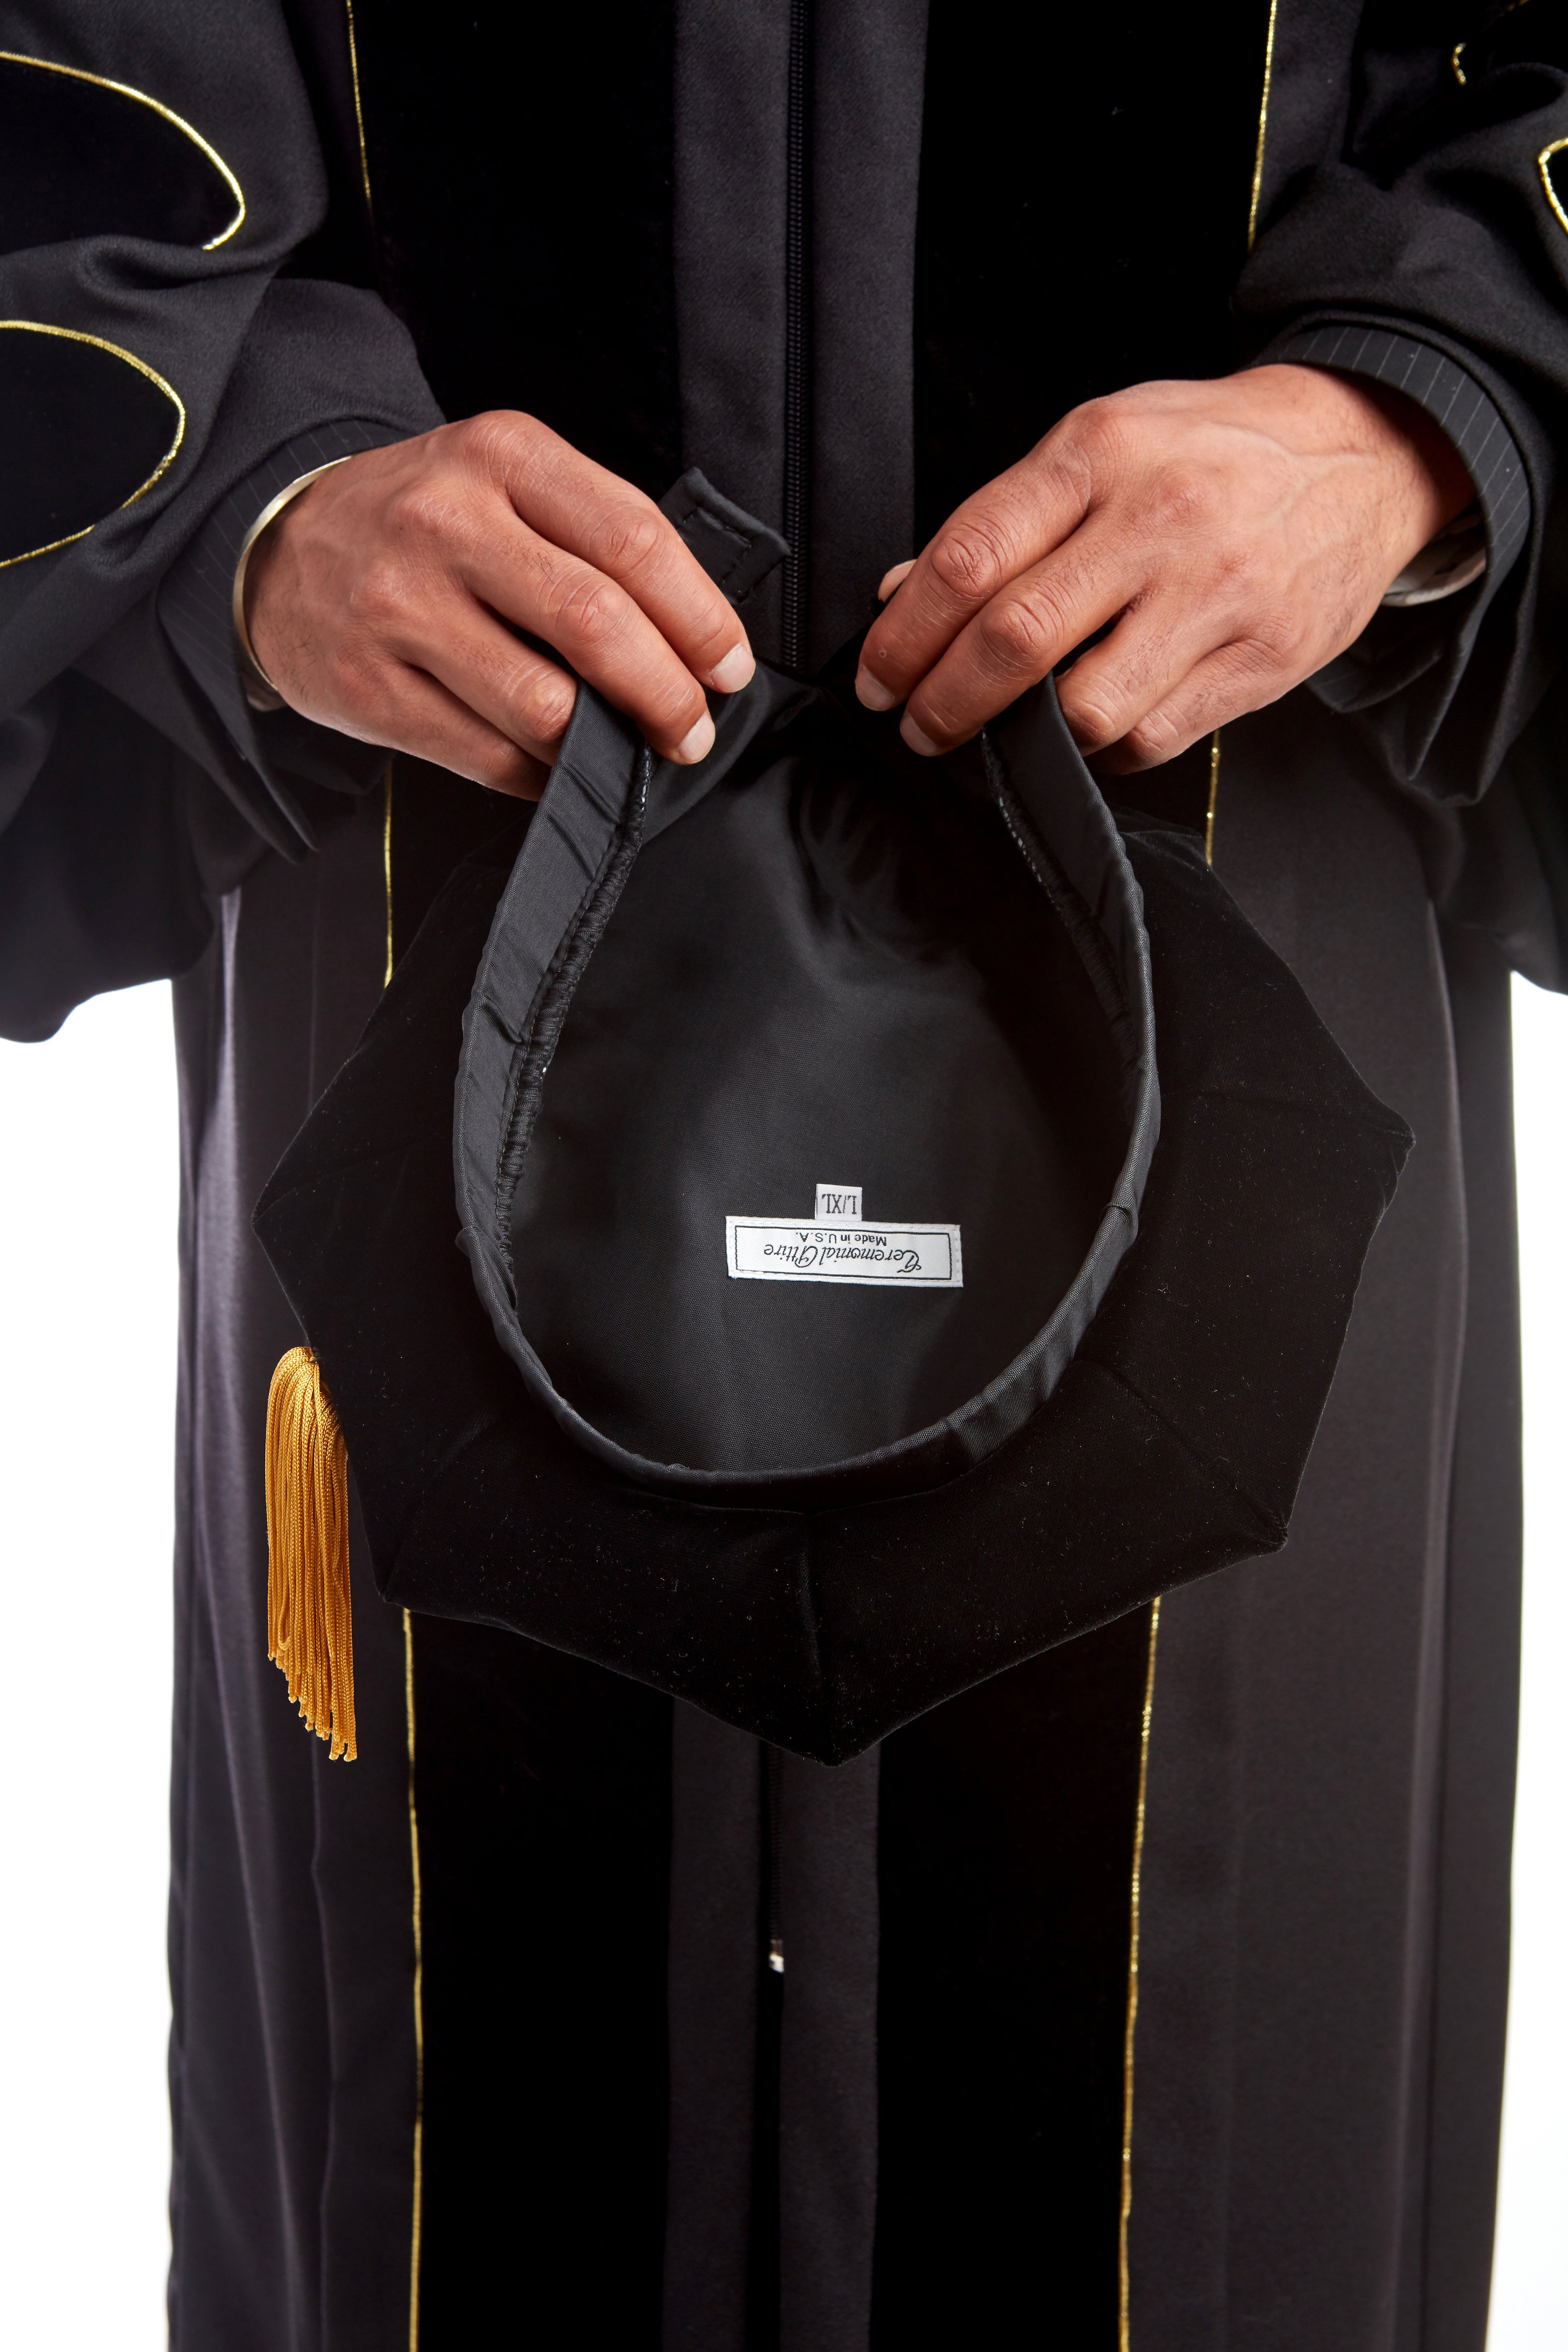 University of Missouri Doctoral Regalia Rental Set - Doctoral Gown, PhD Hood, and 8-sided Cap / Tam with Tassel